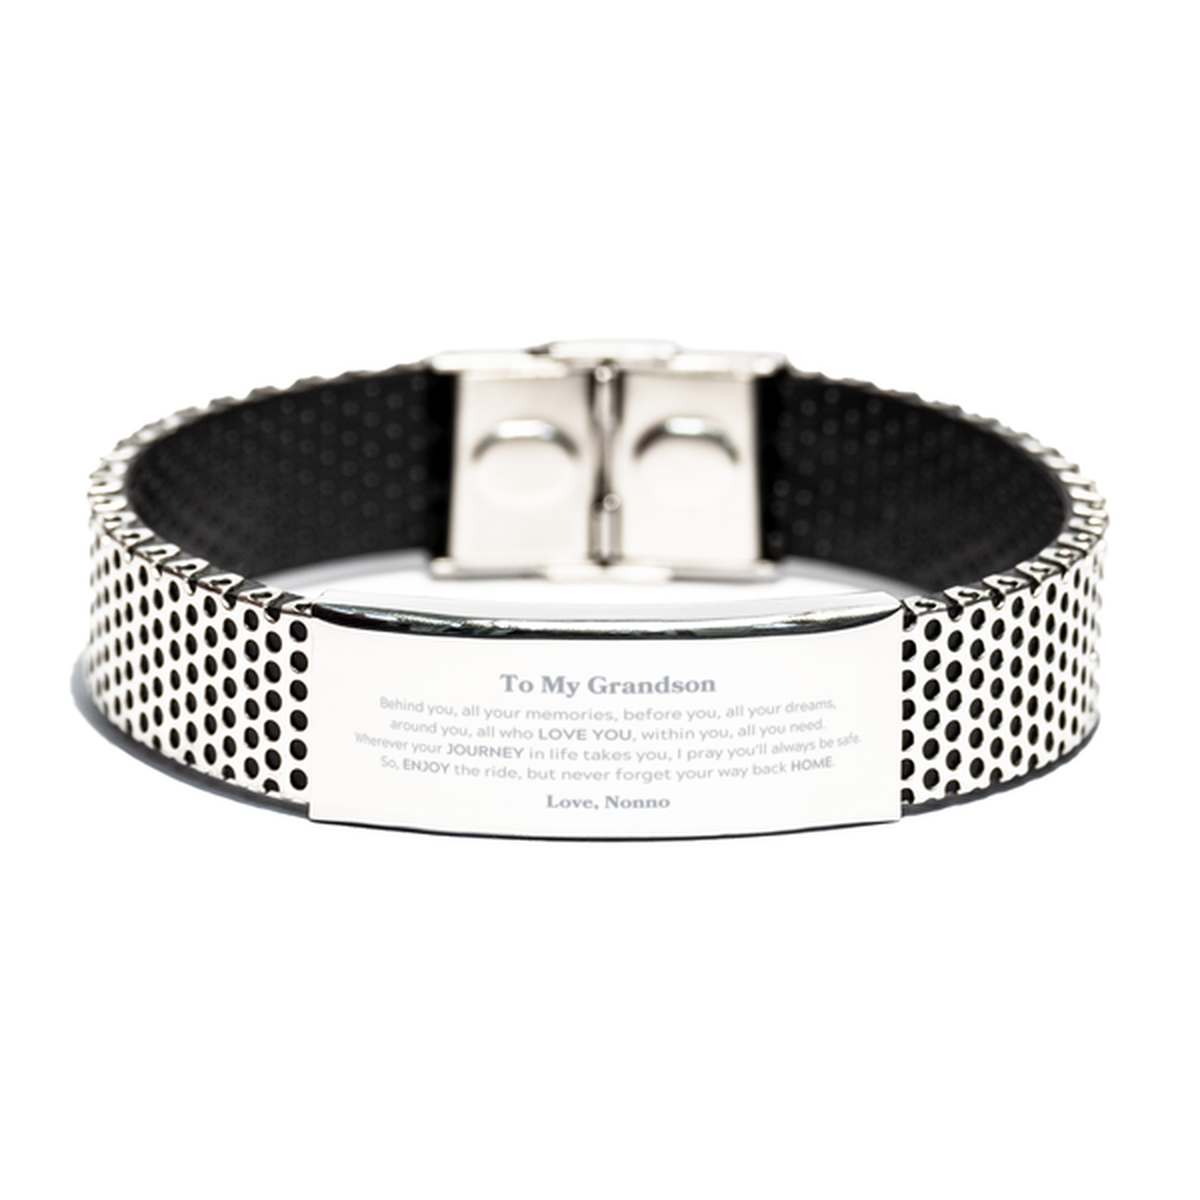 To My Grandson Graduation Gifts from Nonno, Grandson Stainless Steel Bracelet Christmas Birthday Gifts for Grandson Behind you, all your memories, before you, all your dreams. Love, Nonno